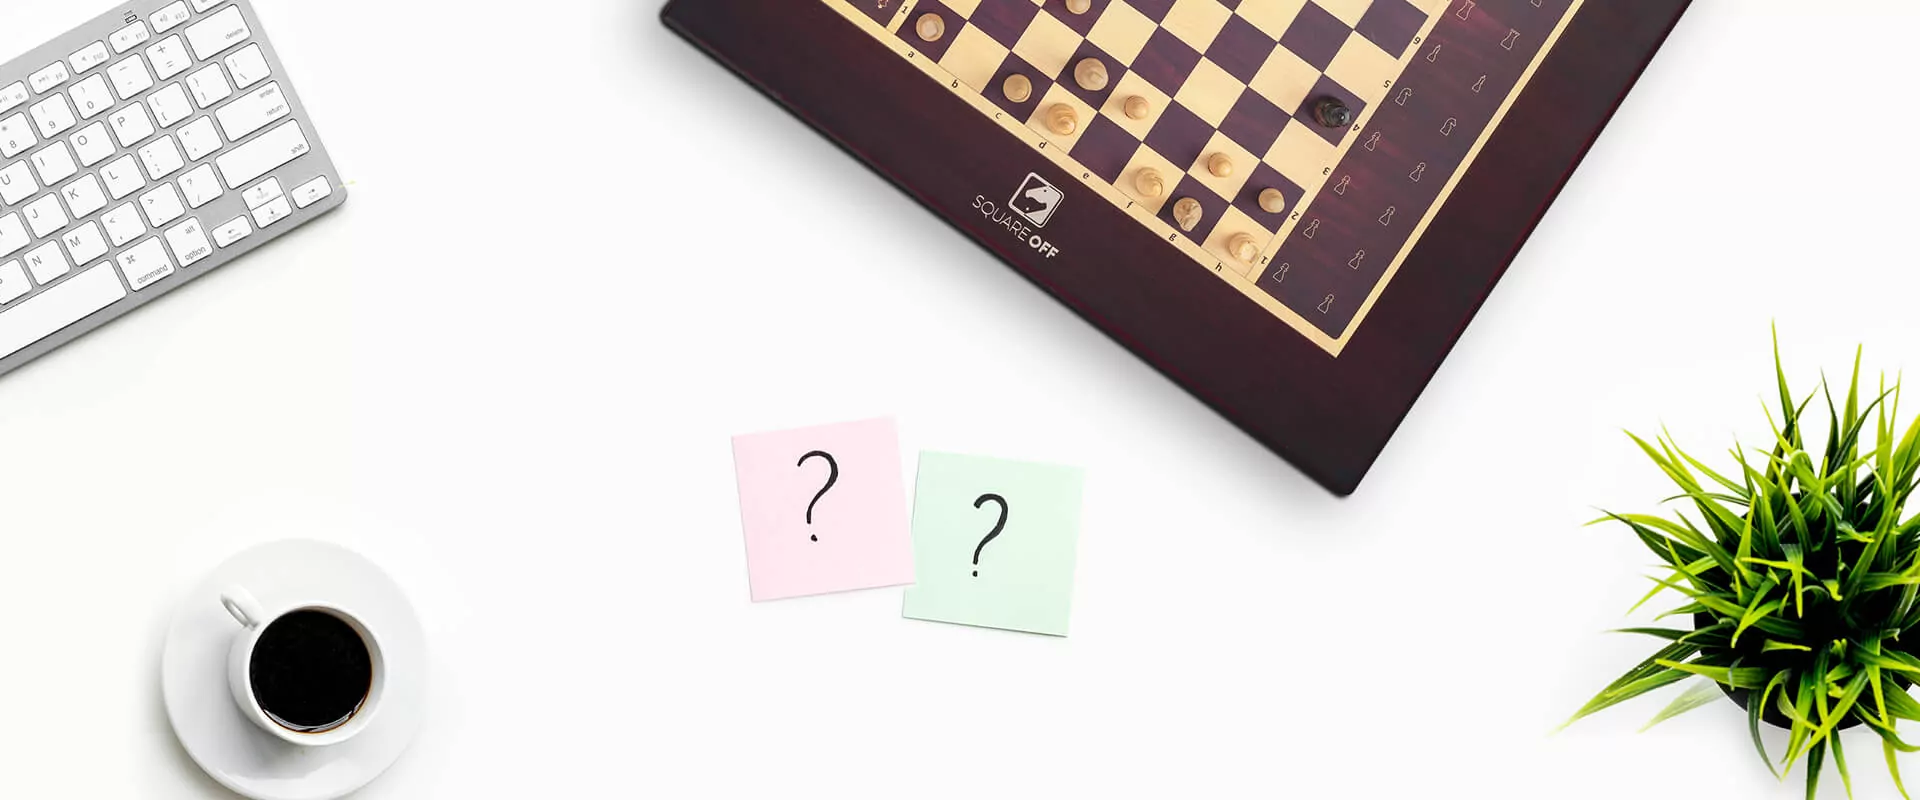 How do I start a game? - Chess.com Member Support and FAQs